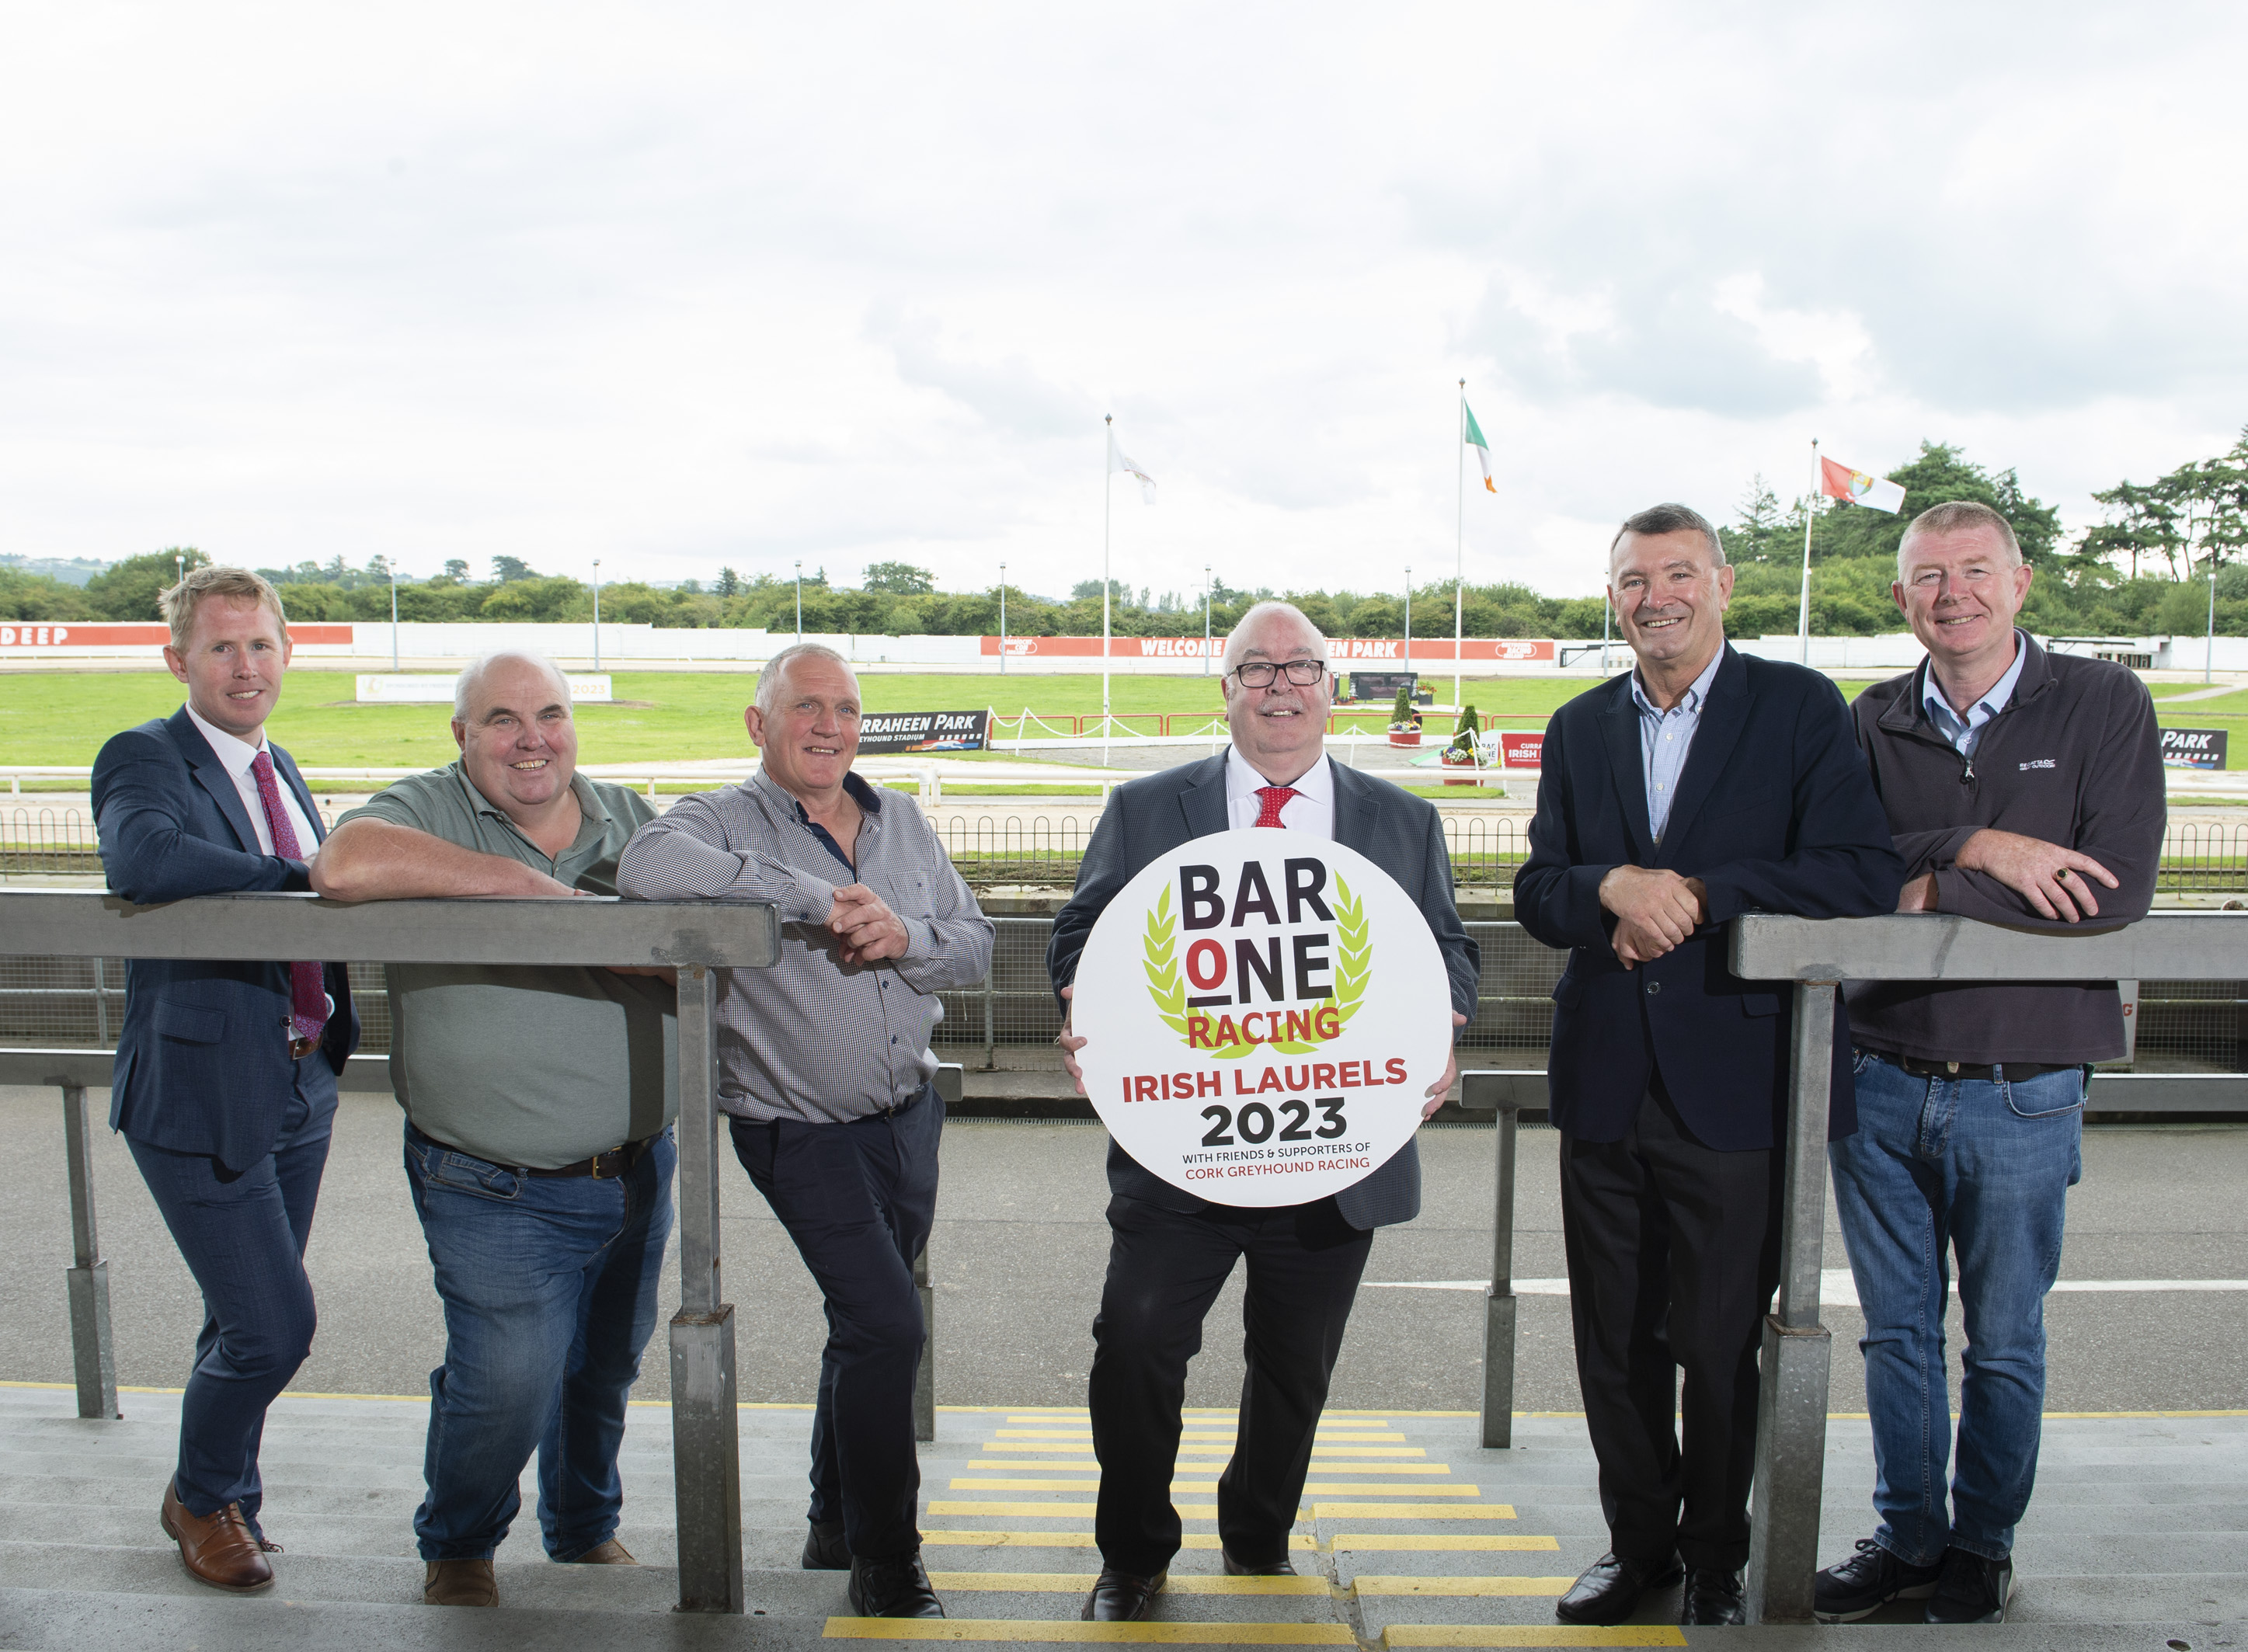 John McDonnell (Bar One Racing), JJ Fennelly, Tony Winters, Barney O'Hare (Bar One Racing), Jimmy Barry Murphy & Damian Holland - announcing details of Bar One Racing & Friends of Cork Greyhound Racing sponsorhsip partnership